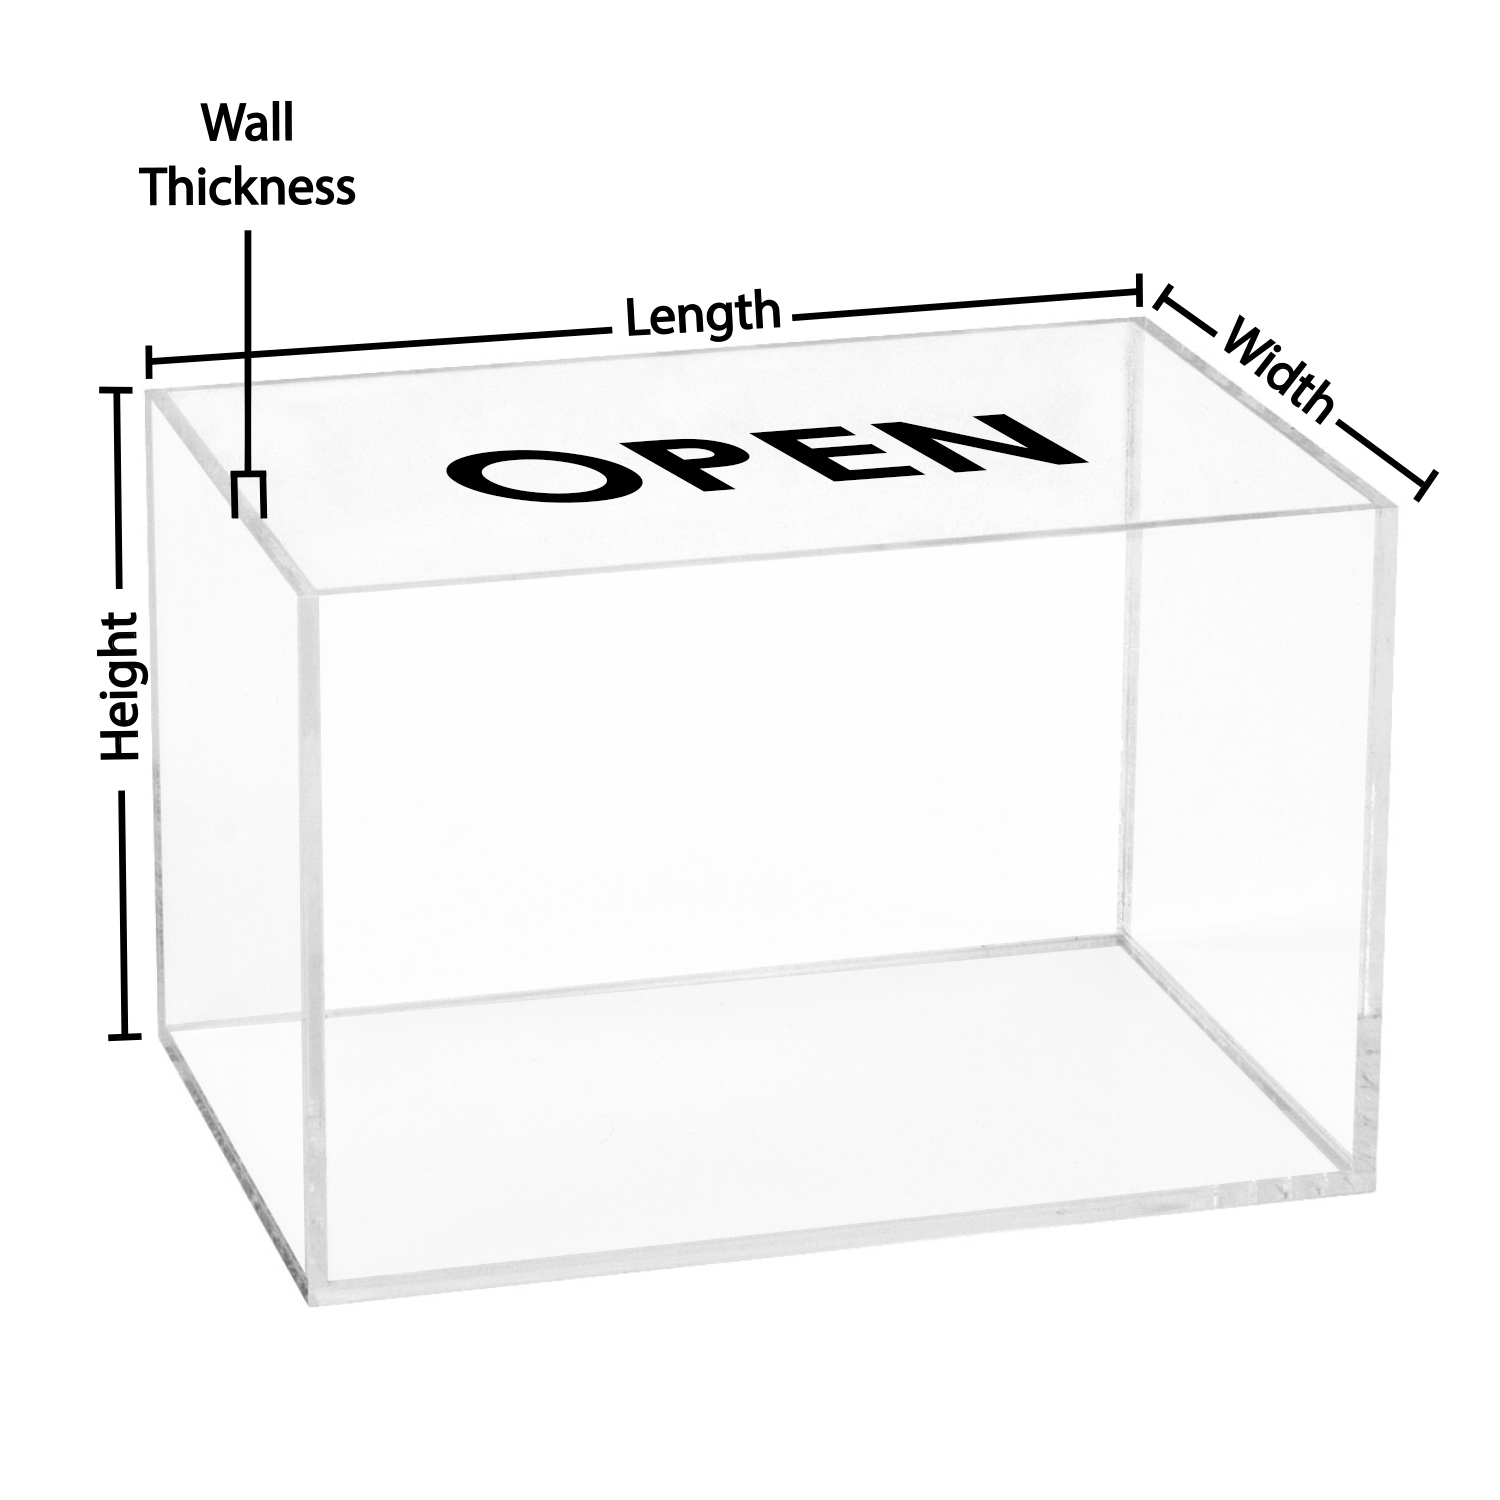 Personalized Acrylic Card Box, Clear Box with Lock Sign, Wedding